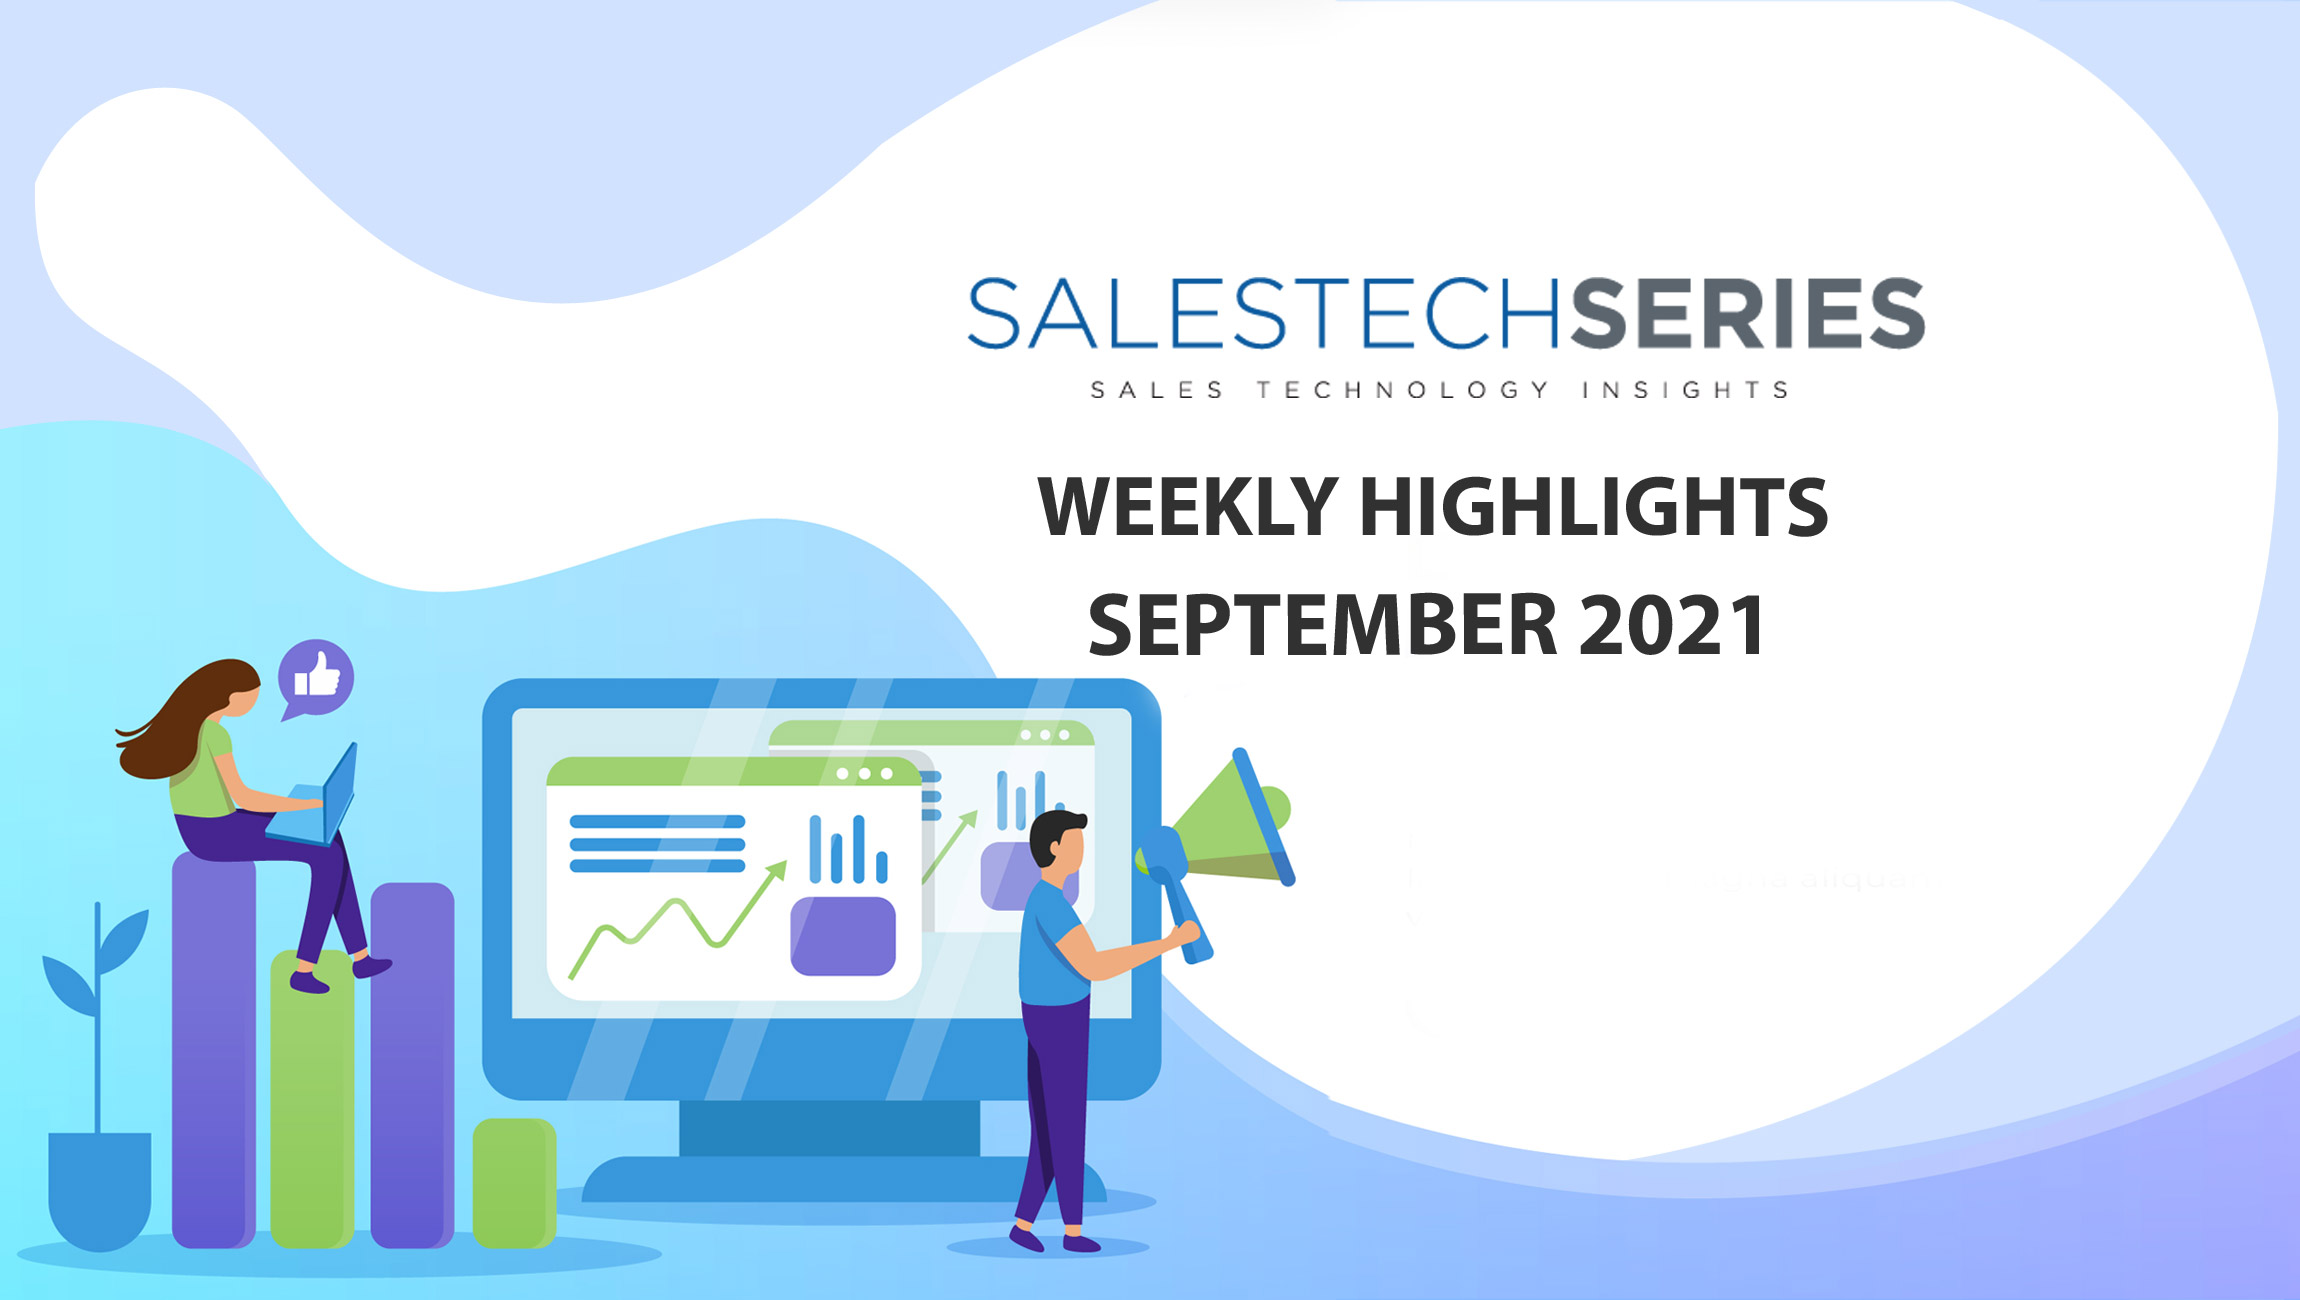 SalesTechStar’s Sales Technology Highlights of The Week: Featuring Partnerize, Salesloft, Digital River and more!